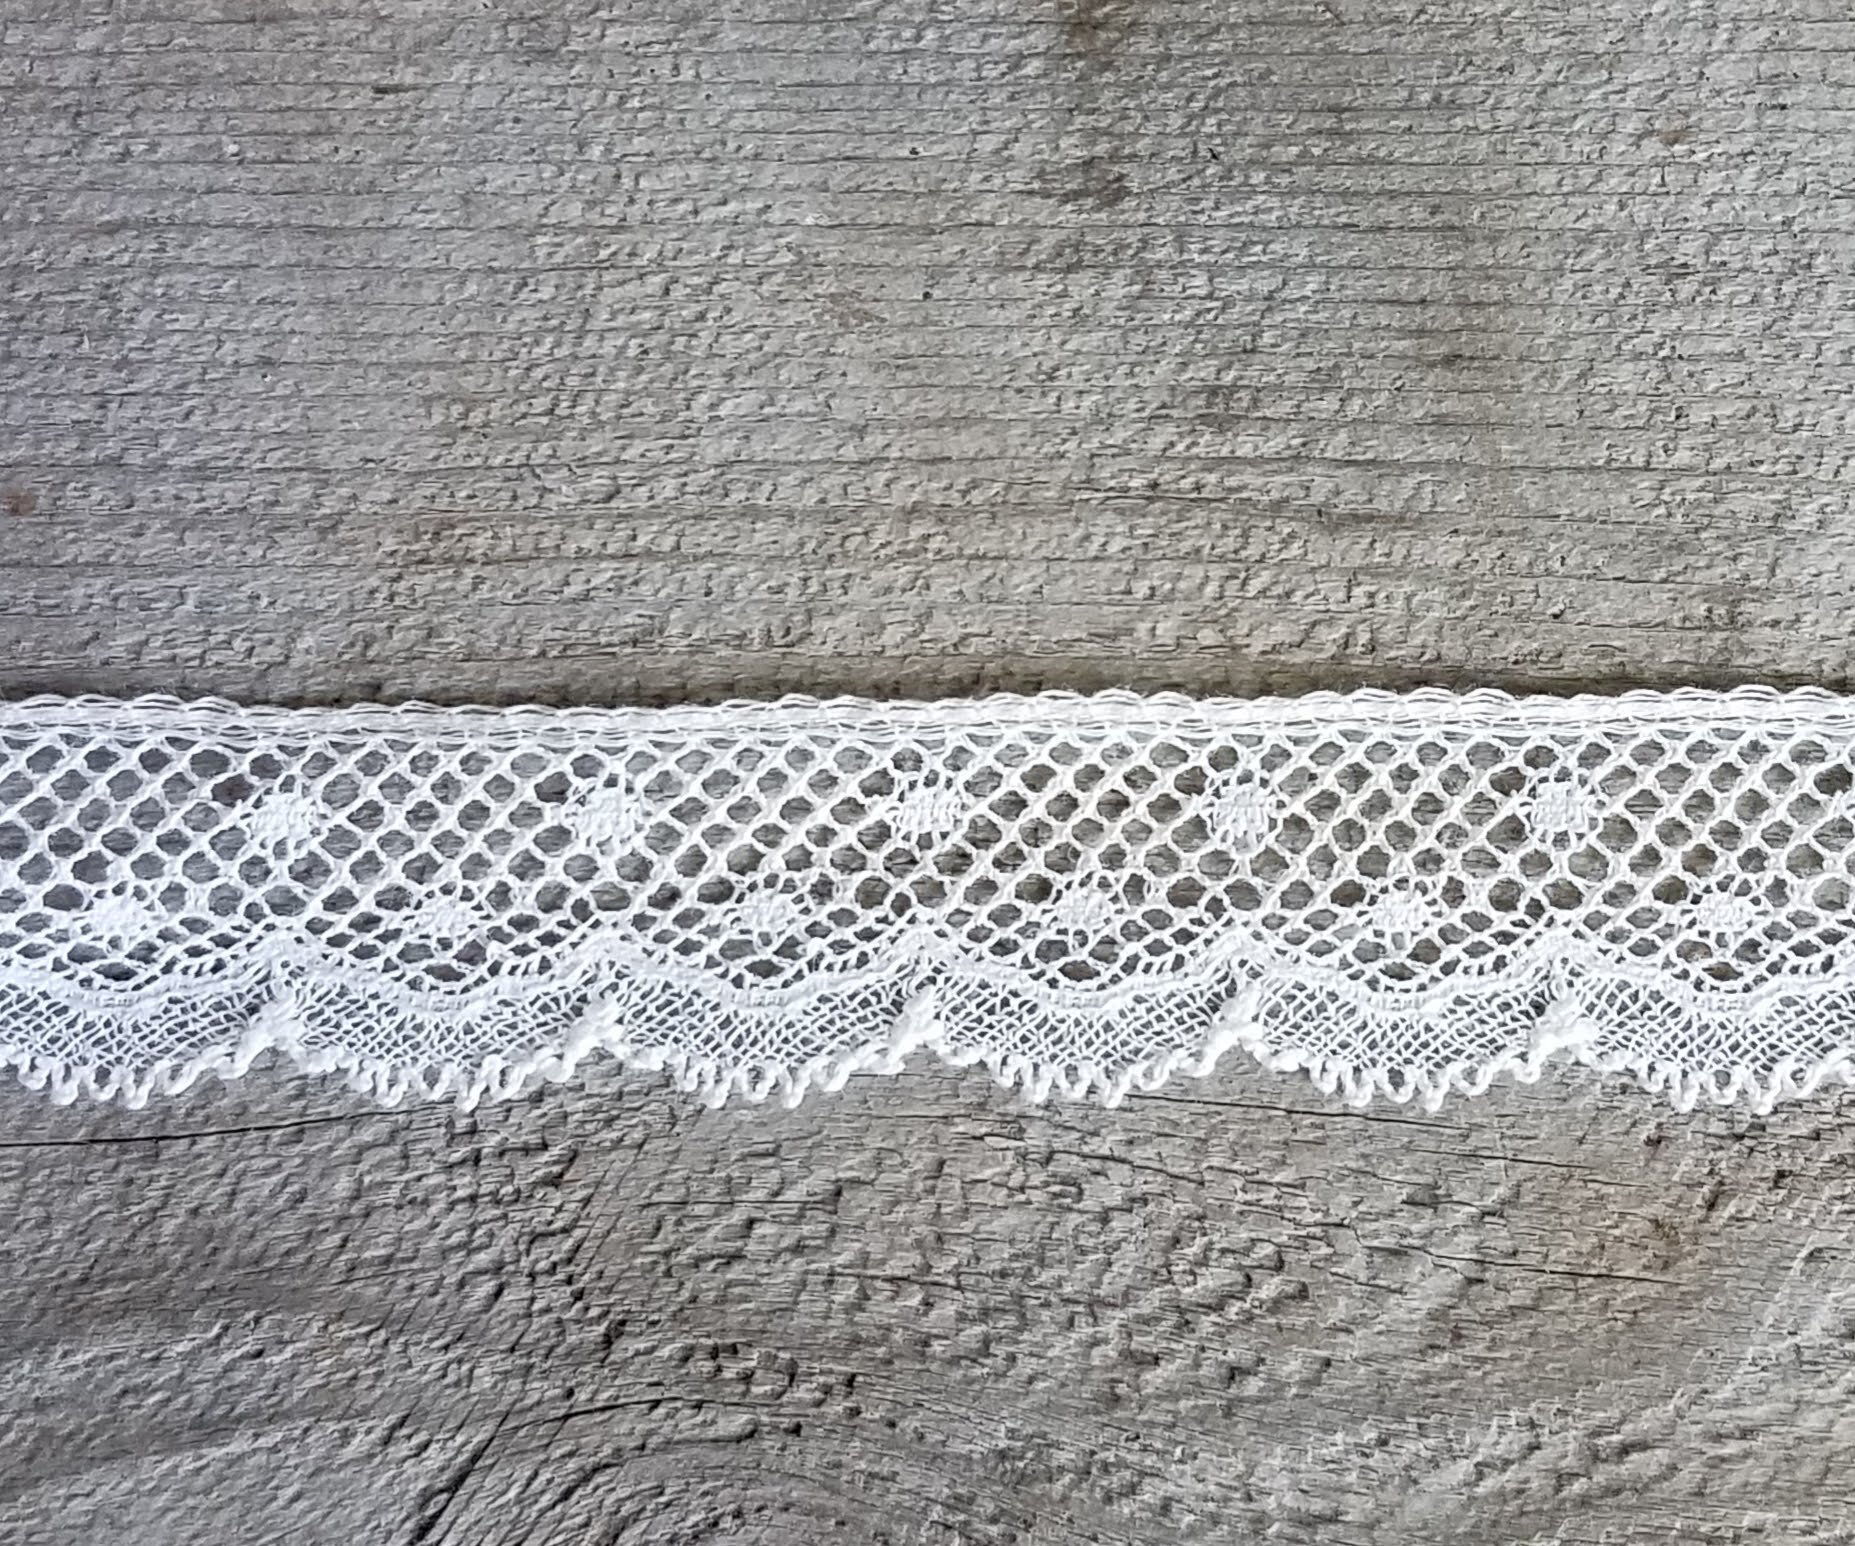 https://sewvintagely.com/wp-content/uploads/2020/09/French20lace20edging203-420ecru.jpg